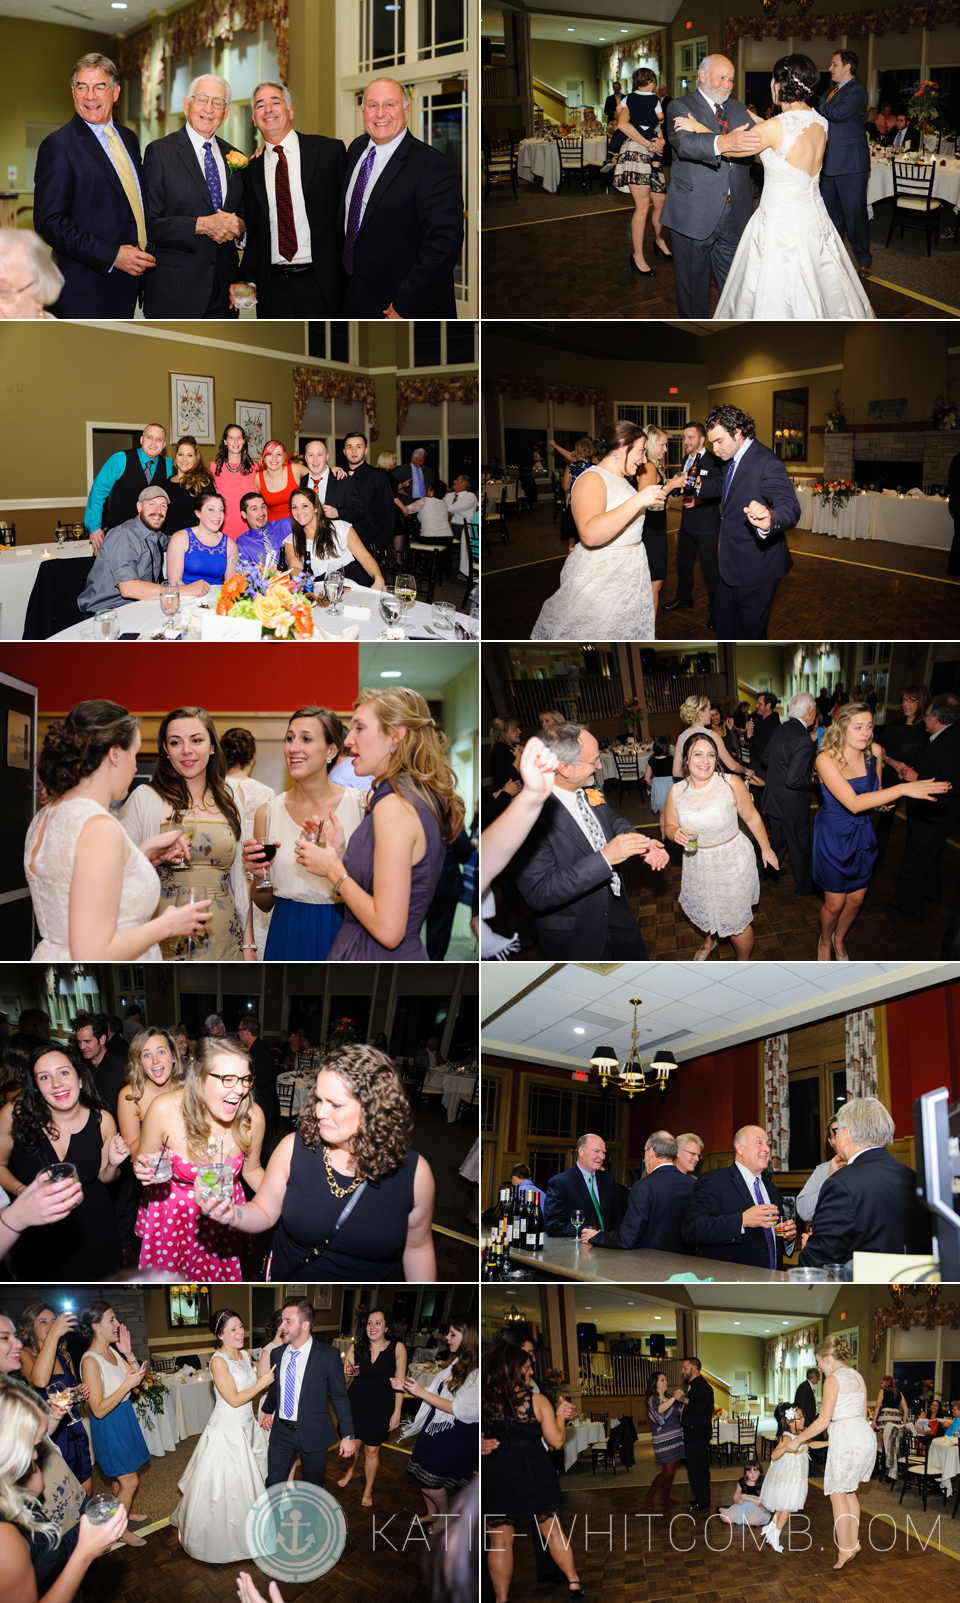 Wedding Reception at South Bend Country Club for a beautiful and elegant wedding